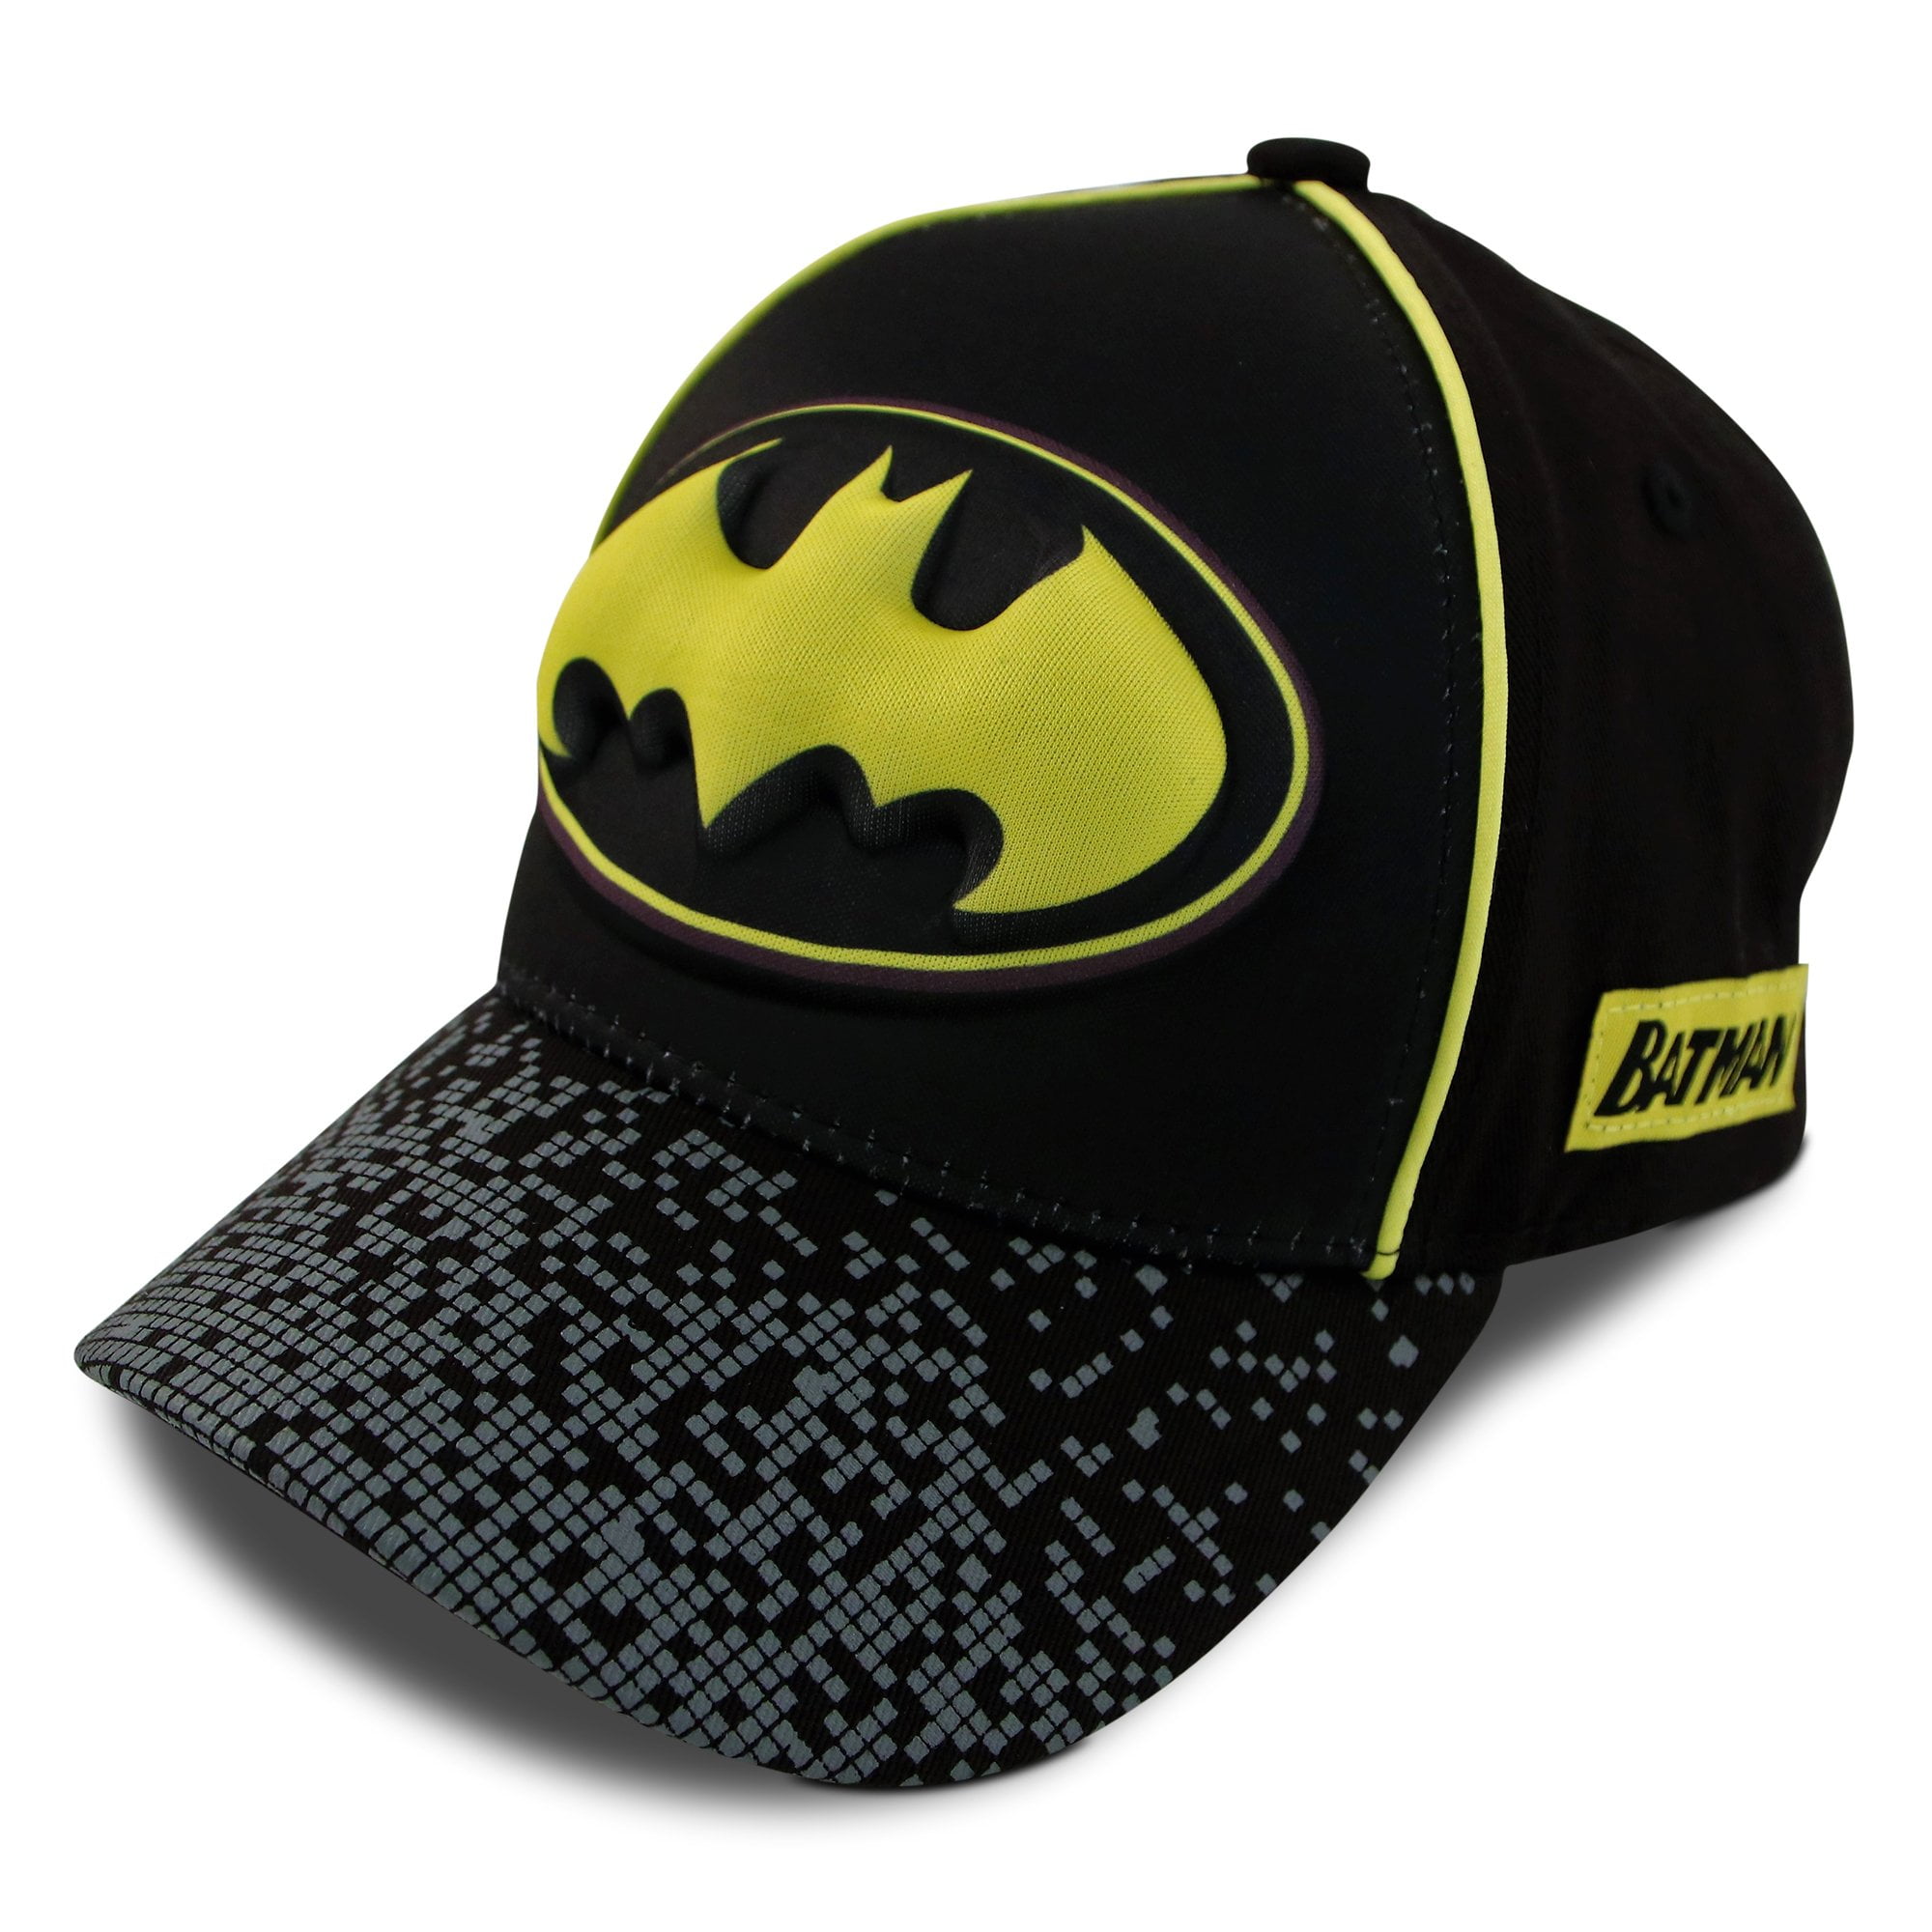 Justice League Blue Baseball Cap New JL777 Youth/Kids DC Comcis 